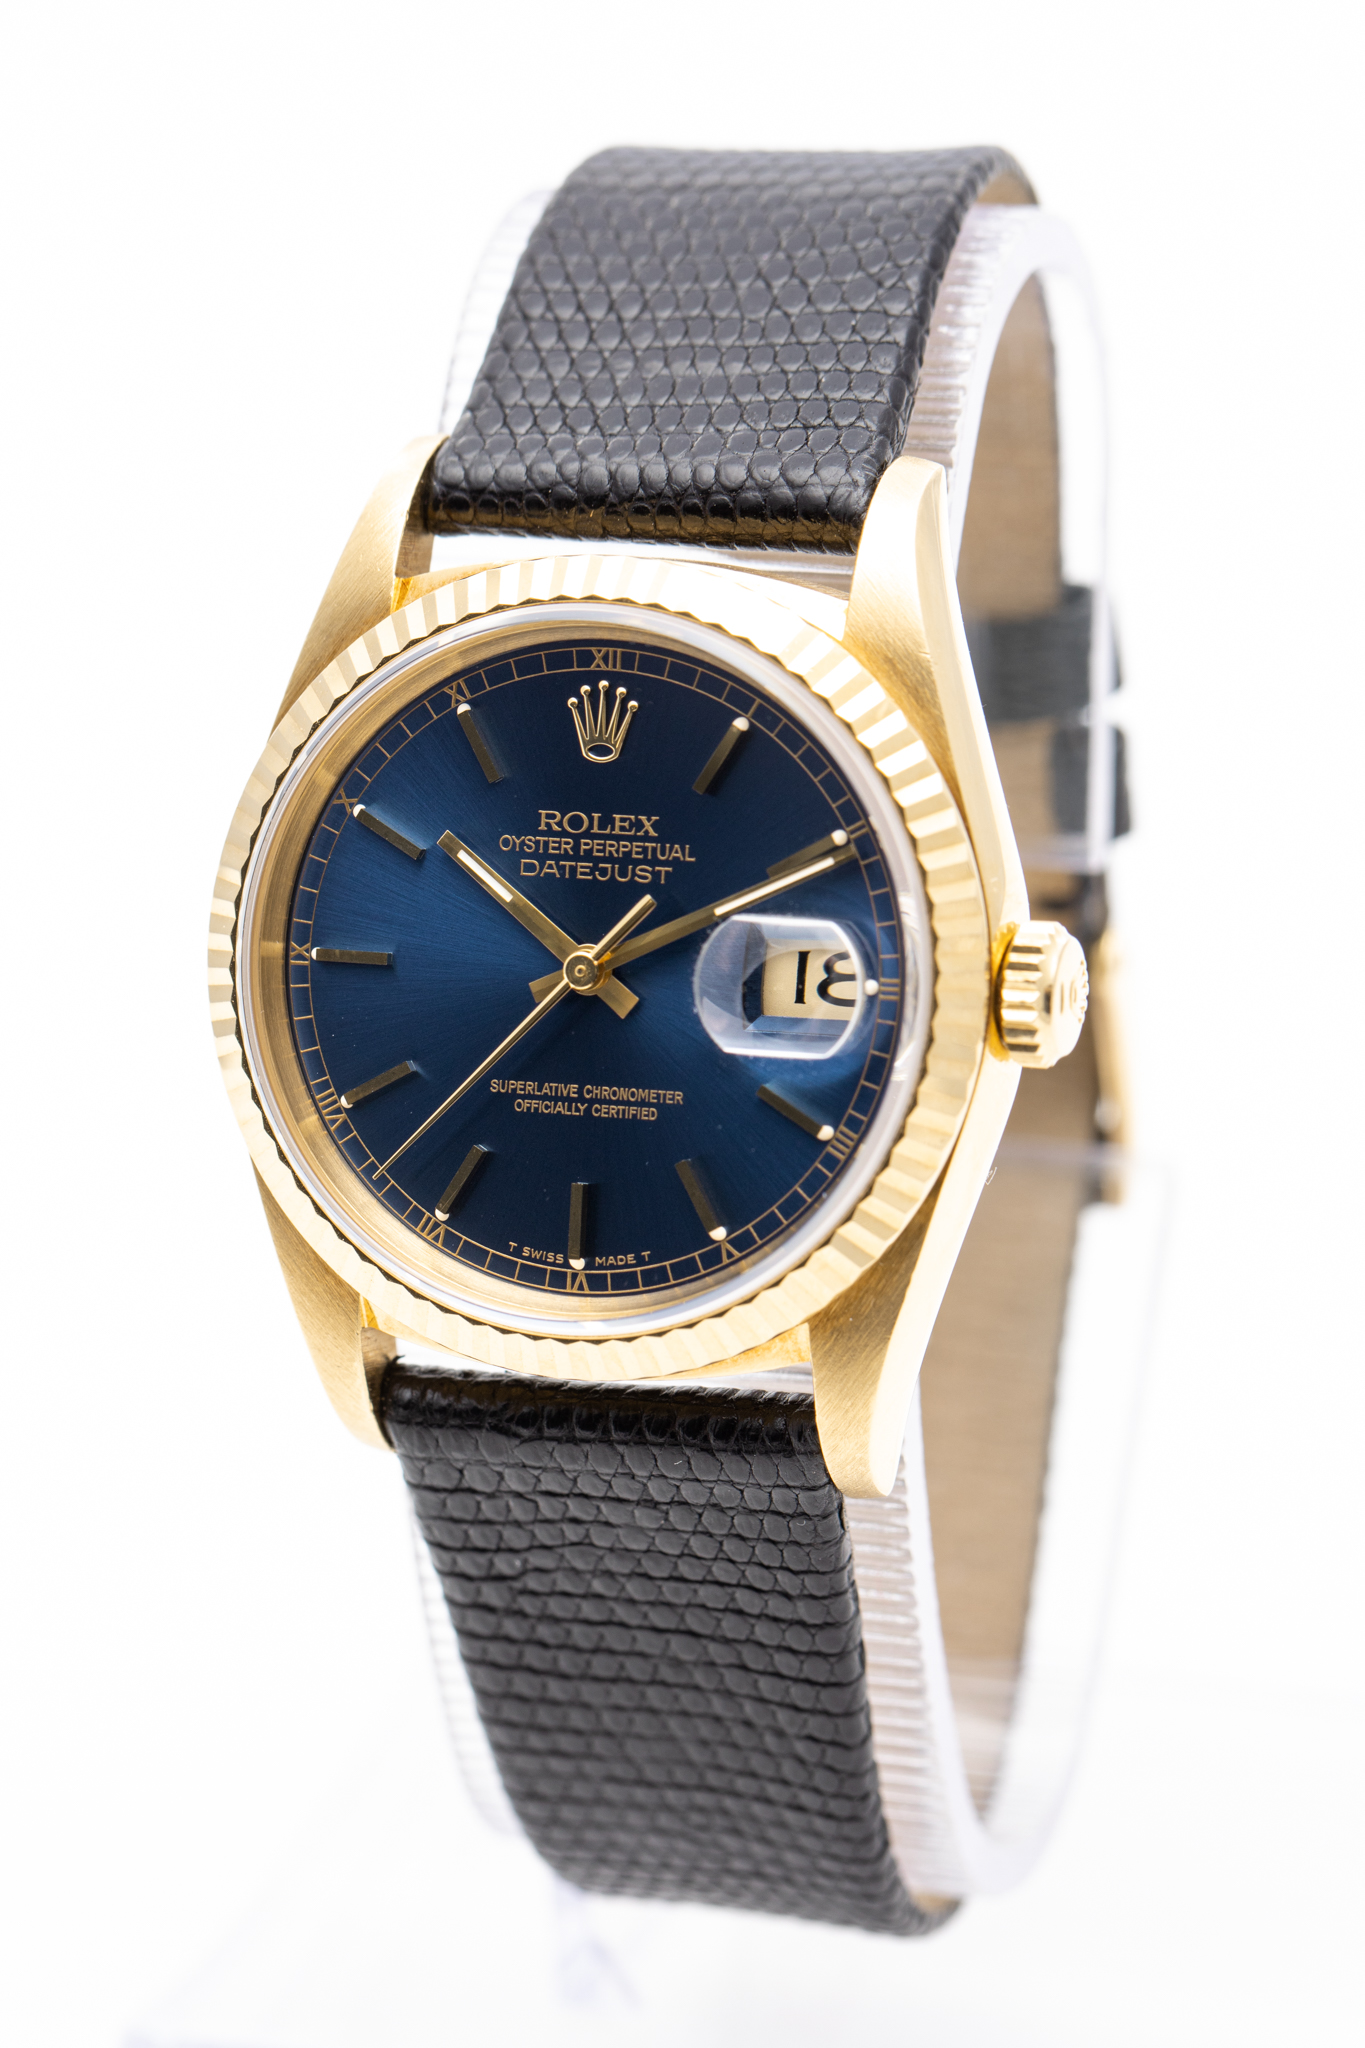 ROLEX DATEJUST 36MM YELLOW GOLD RARE BLUE DIAL AUTOMATIC REF: 16238